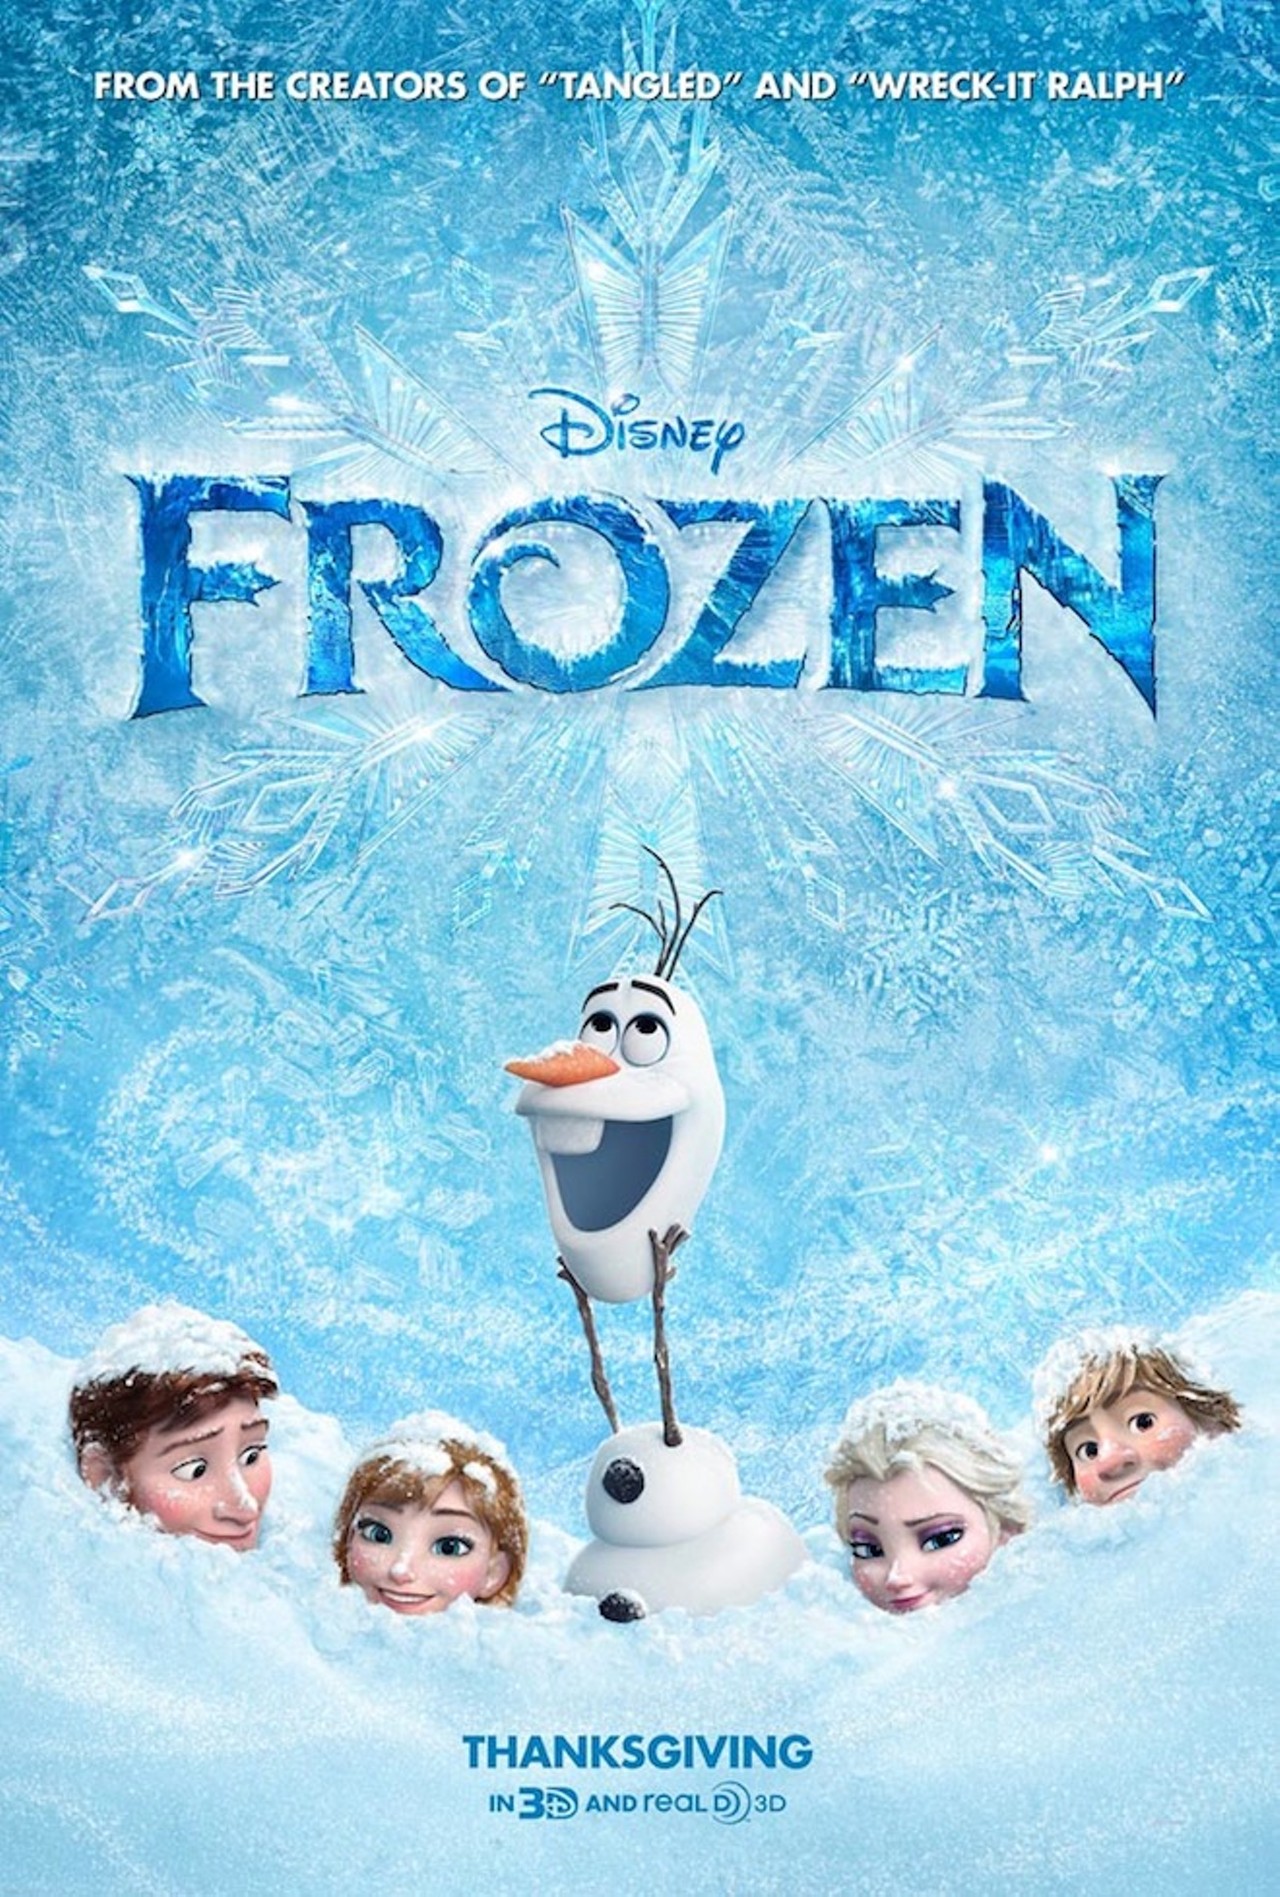 Read our review of Frozen.